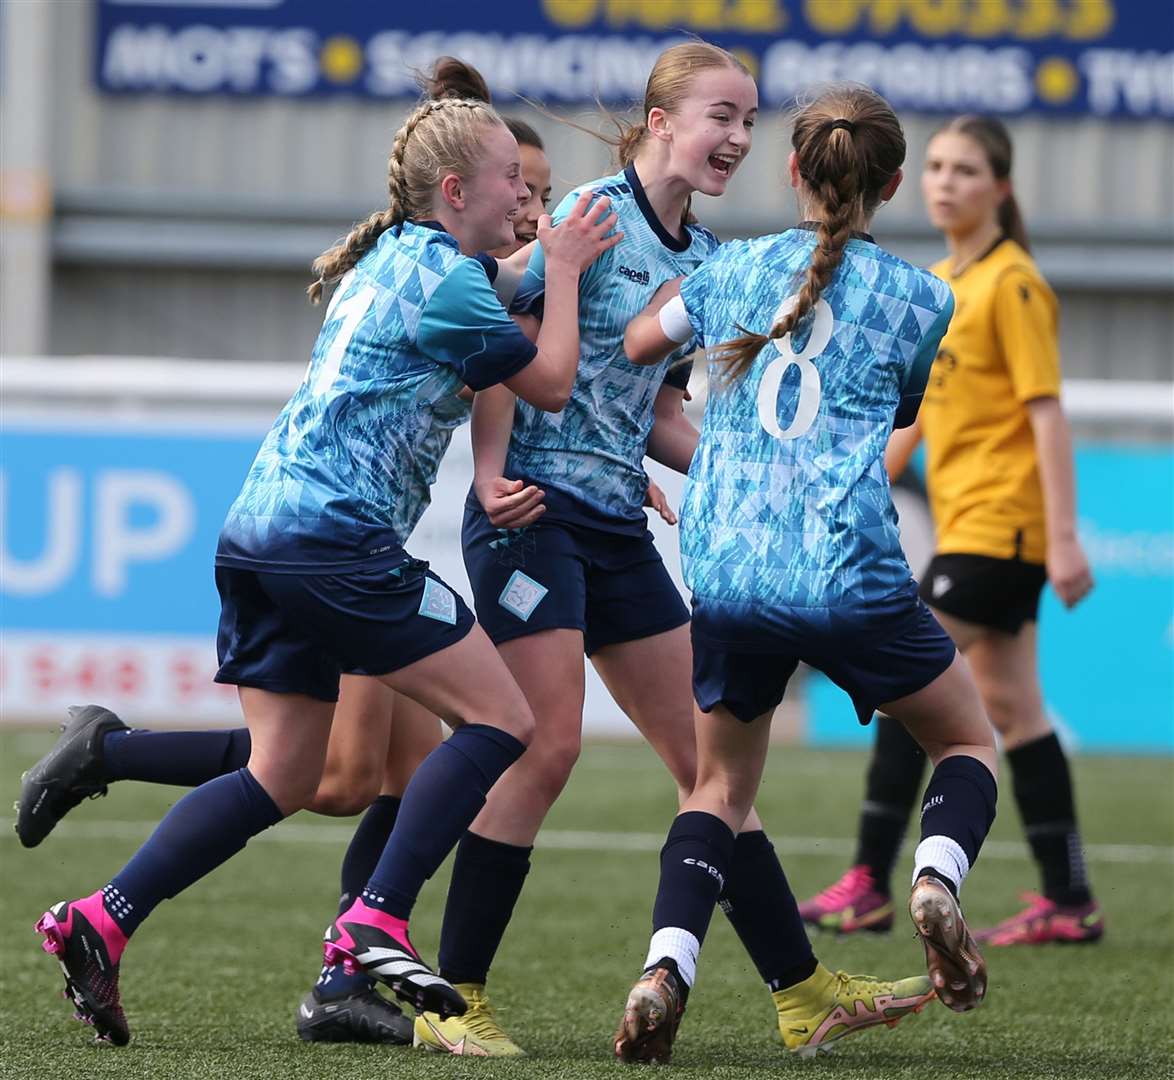 Striker Lucy Hope is congratulated by her team-mates after opening the scoring for London City Lionesses under-14s. Picture: PSP Images